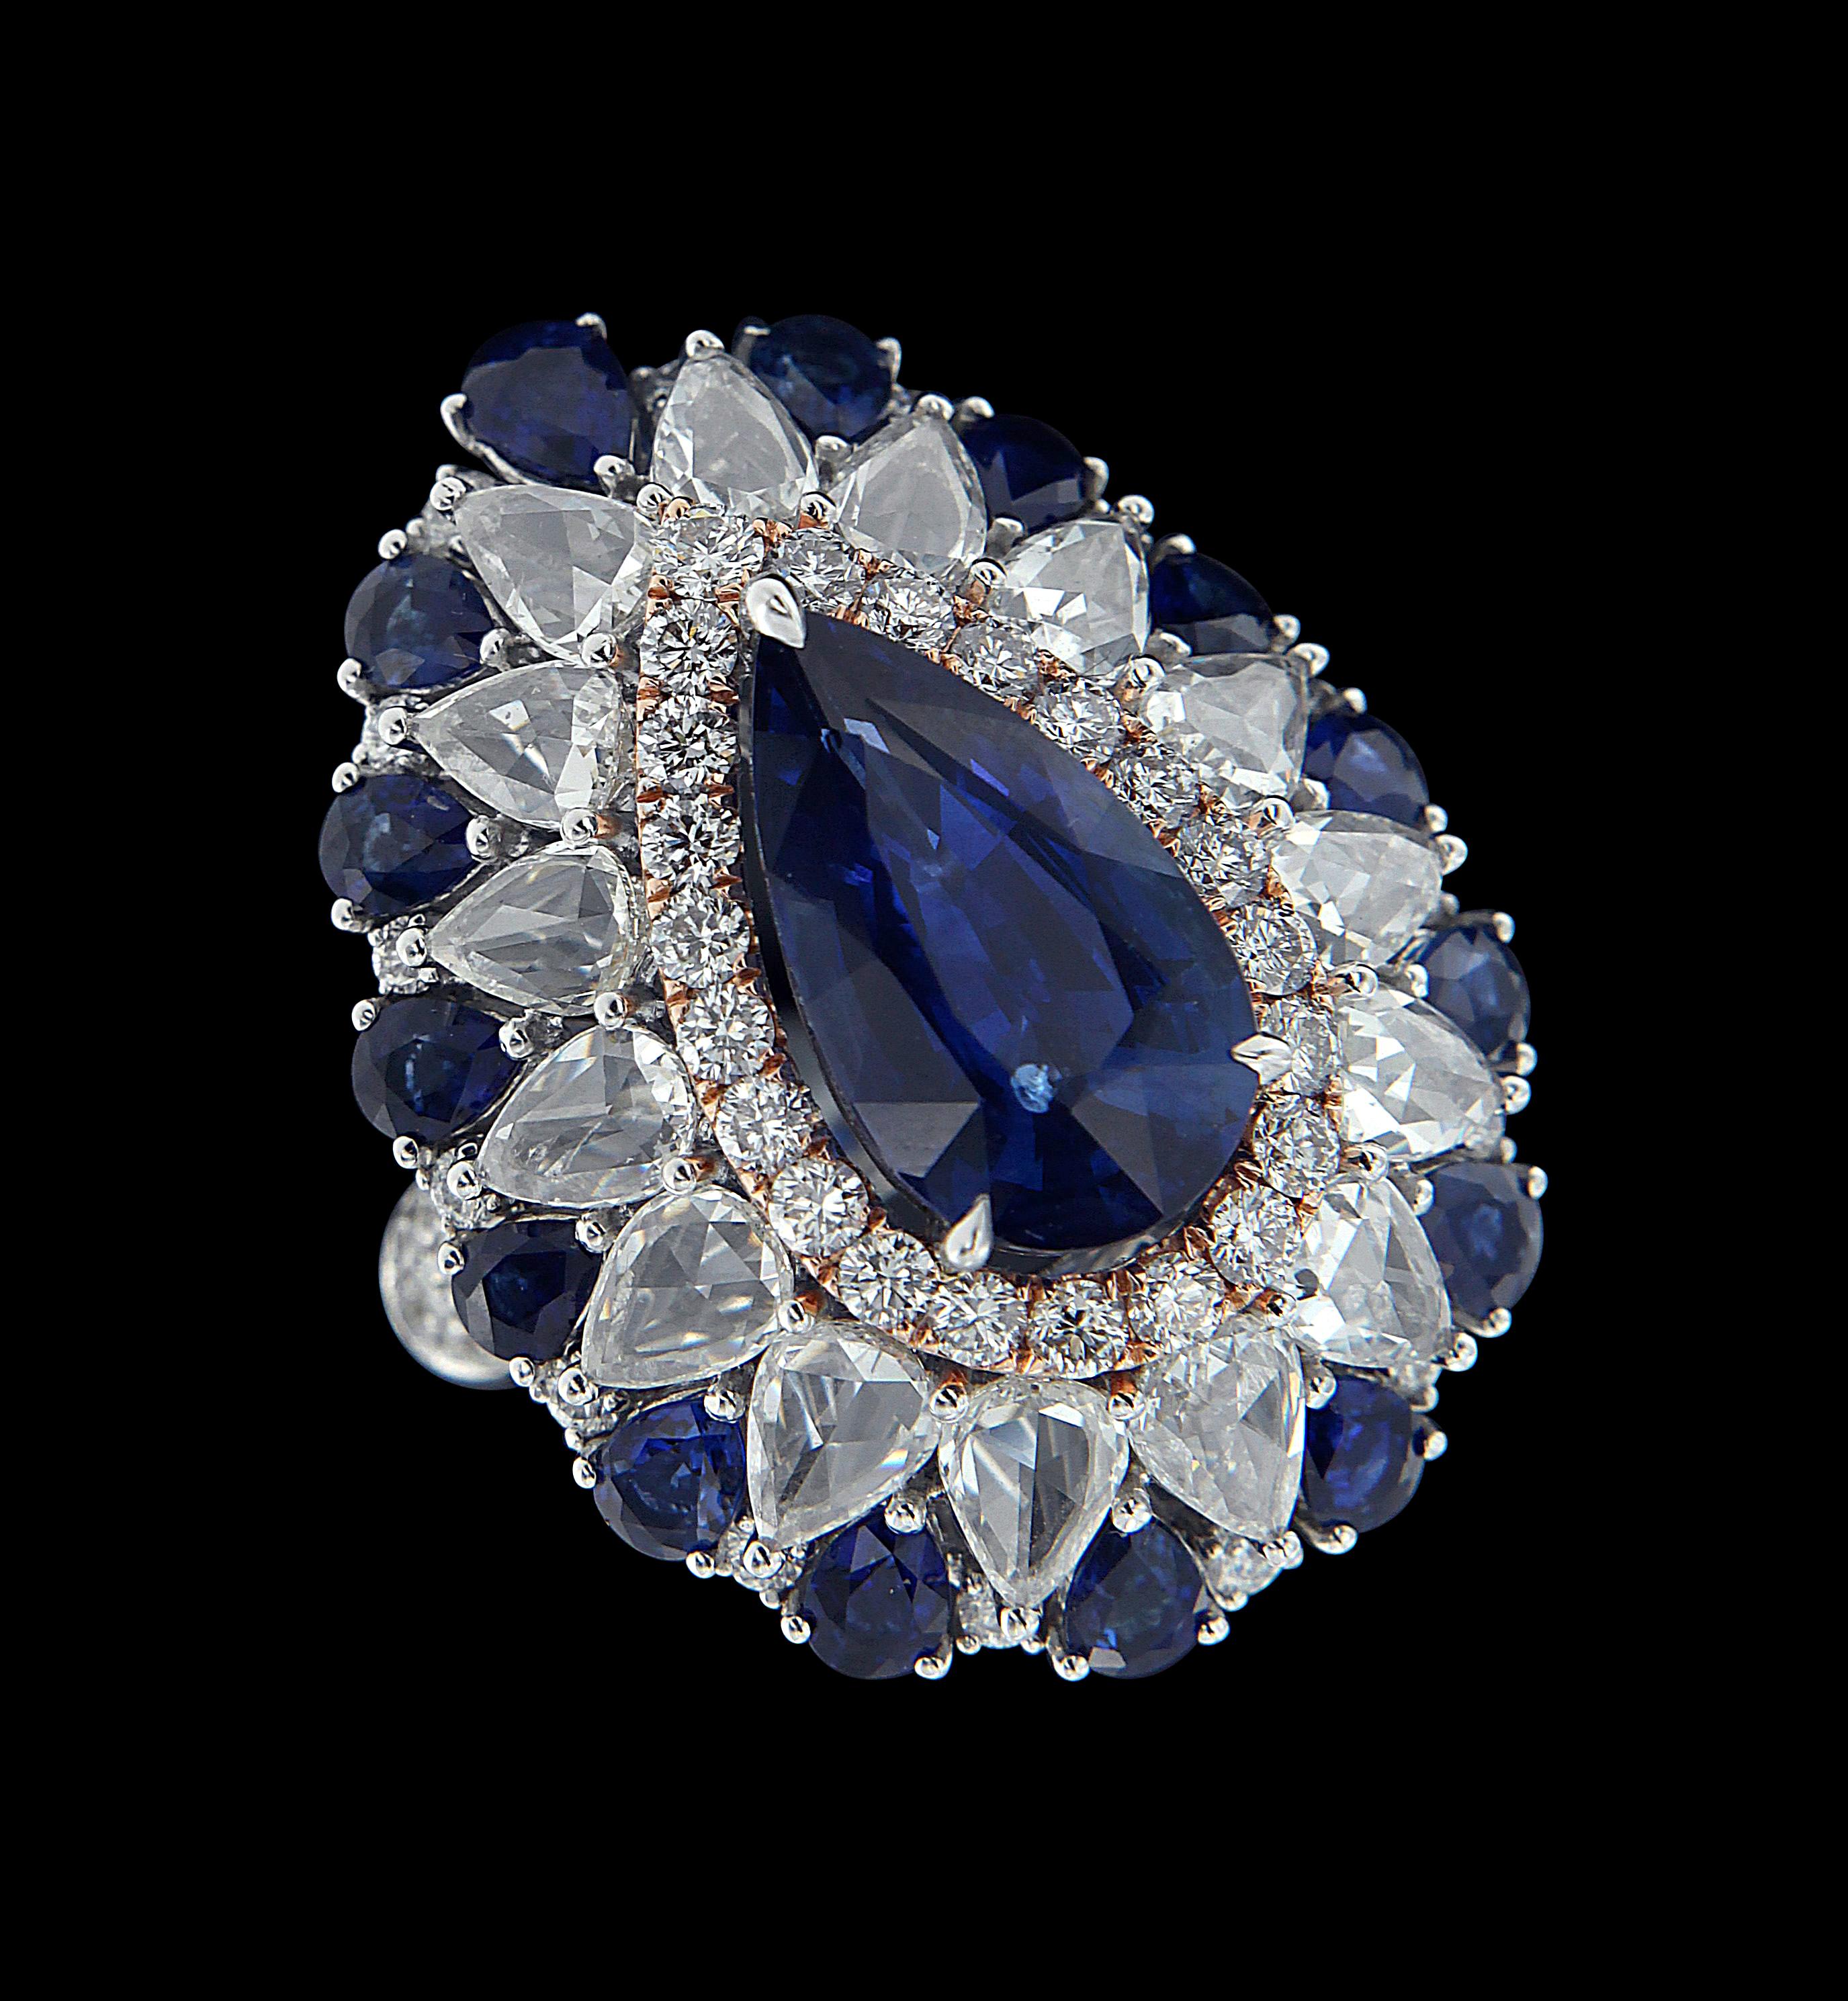 Dazzling 18 Karat White Gold, Diamond, And Sapphire Ring.
Rings:
Diamonds of approximately 4.763carats, sapphire approximately of 9.285carats mounted on 18 karat white pink gold ring. The ring weighs approximately around 16.04grams.
Please note: The